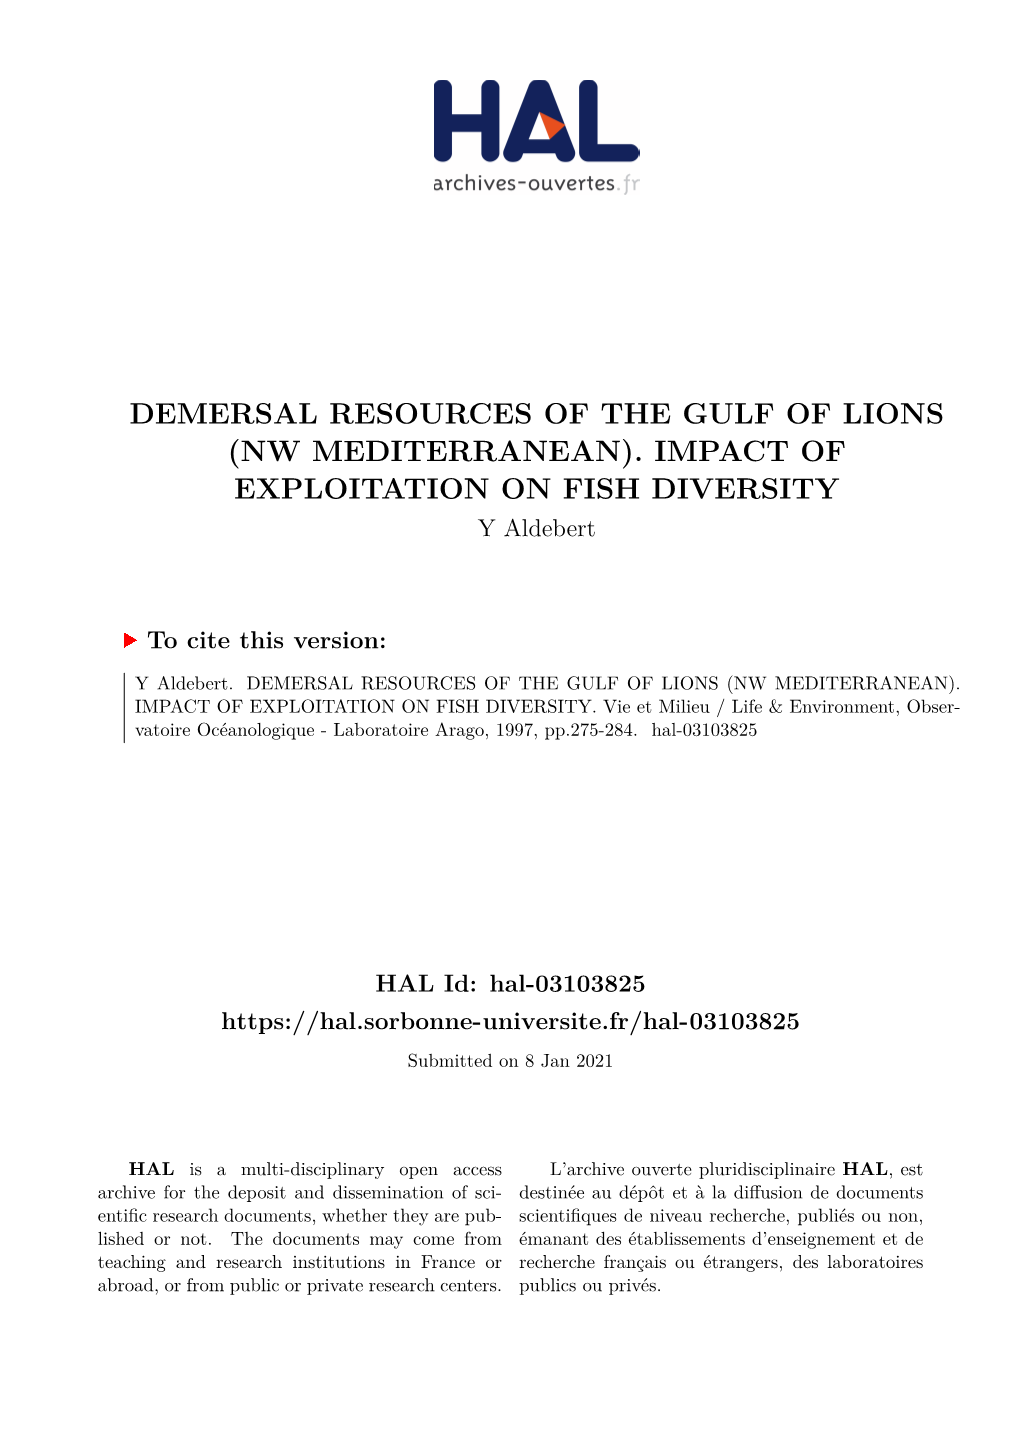 DEMERSAL RESOURCES of the GULF of LIONS (NW MEDITERRANEAN). IMPACT of EXPLOITATION on FISH DIVERSITY Y Aldebert